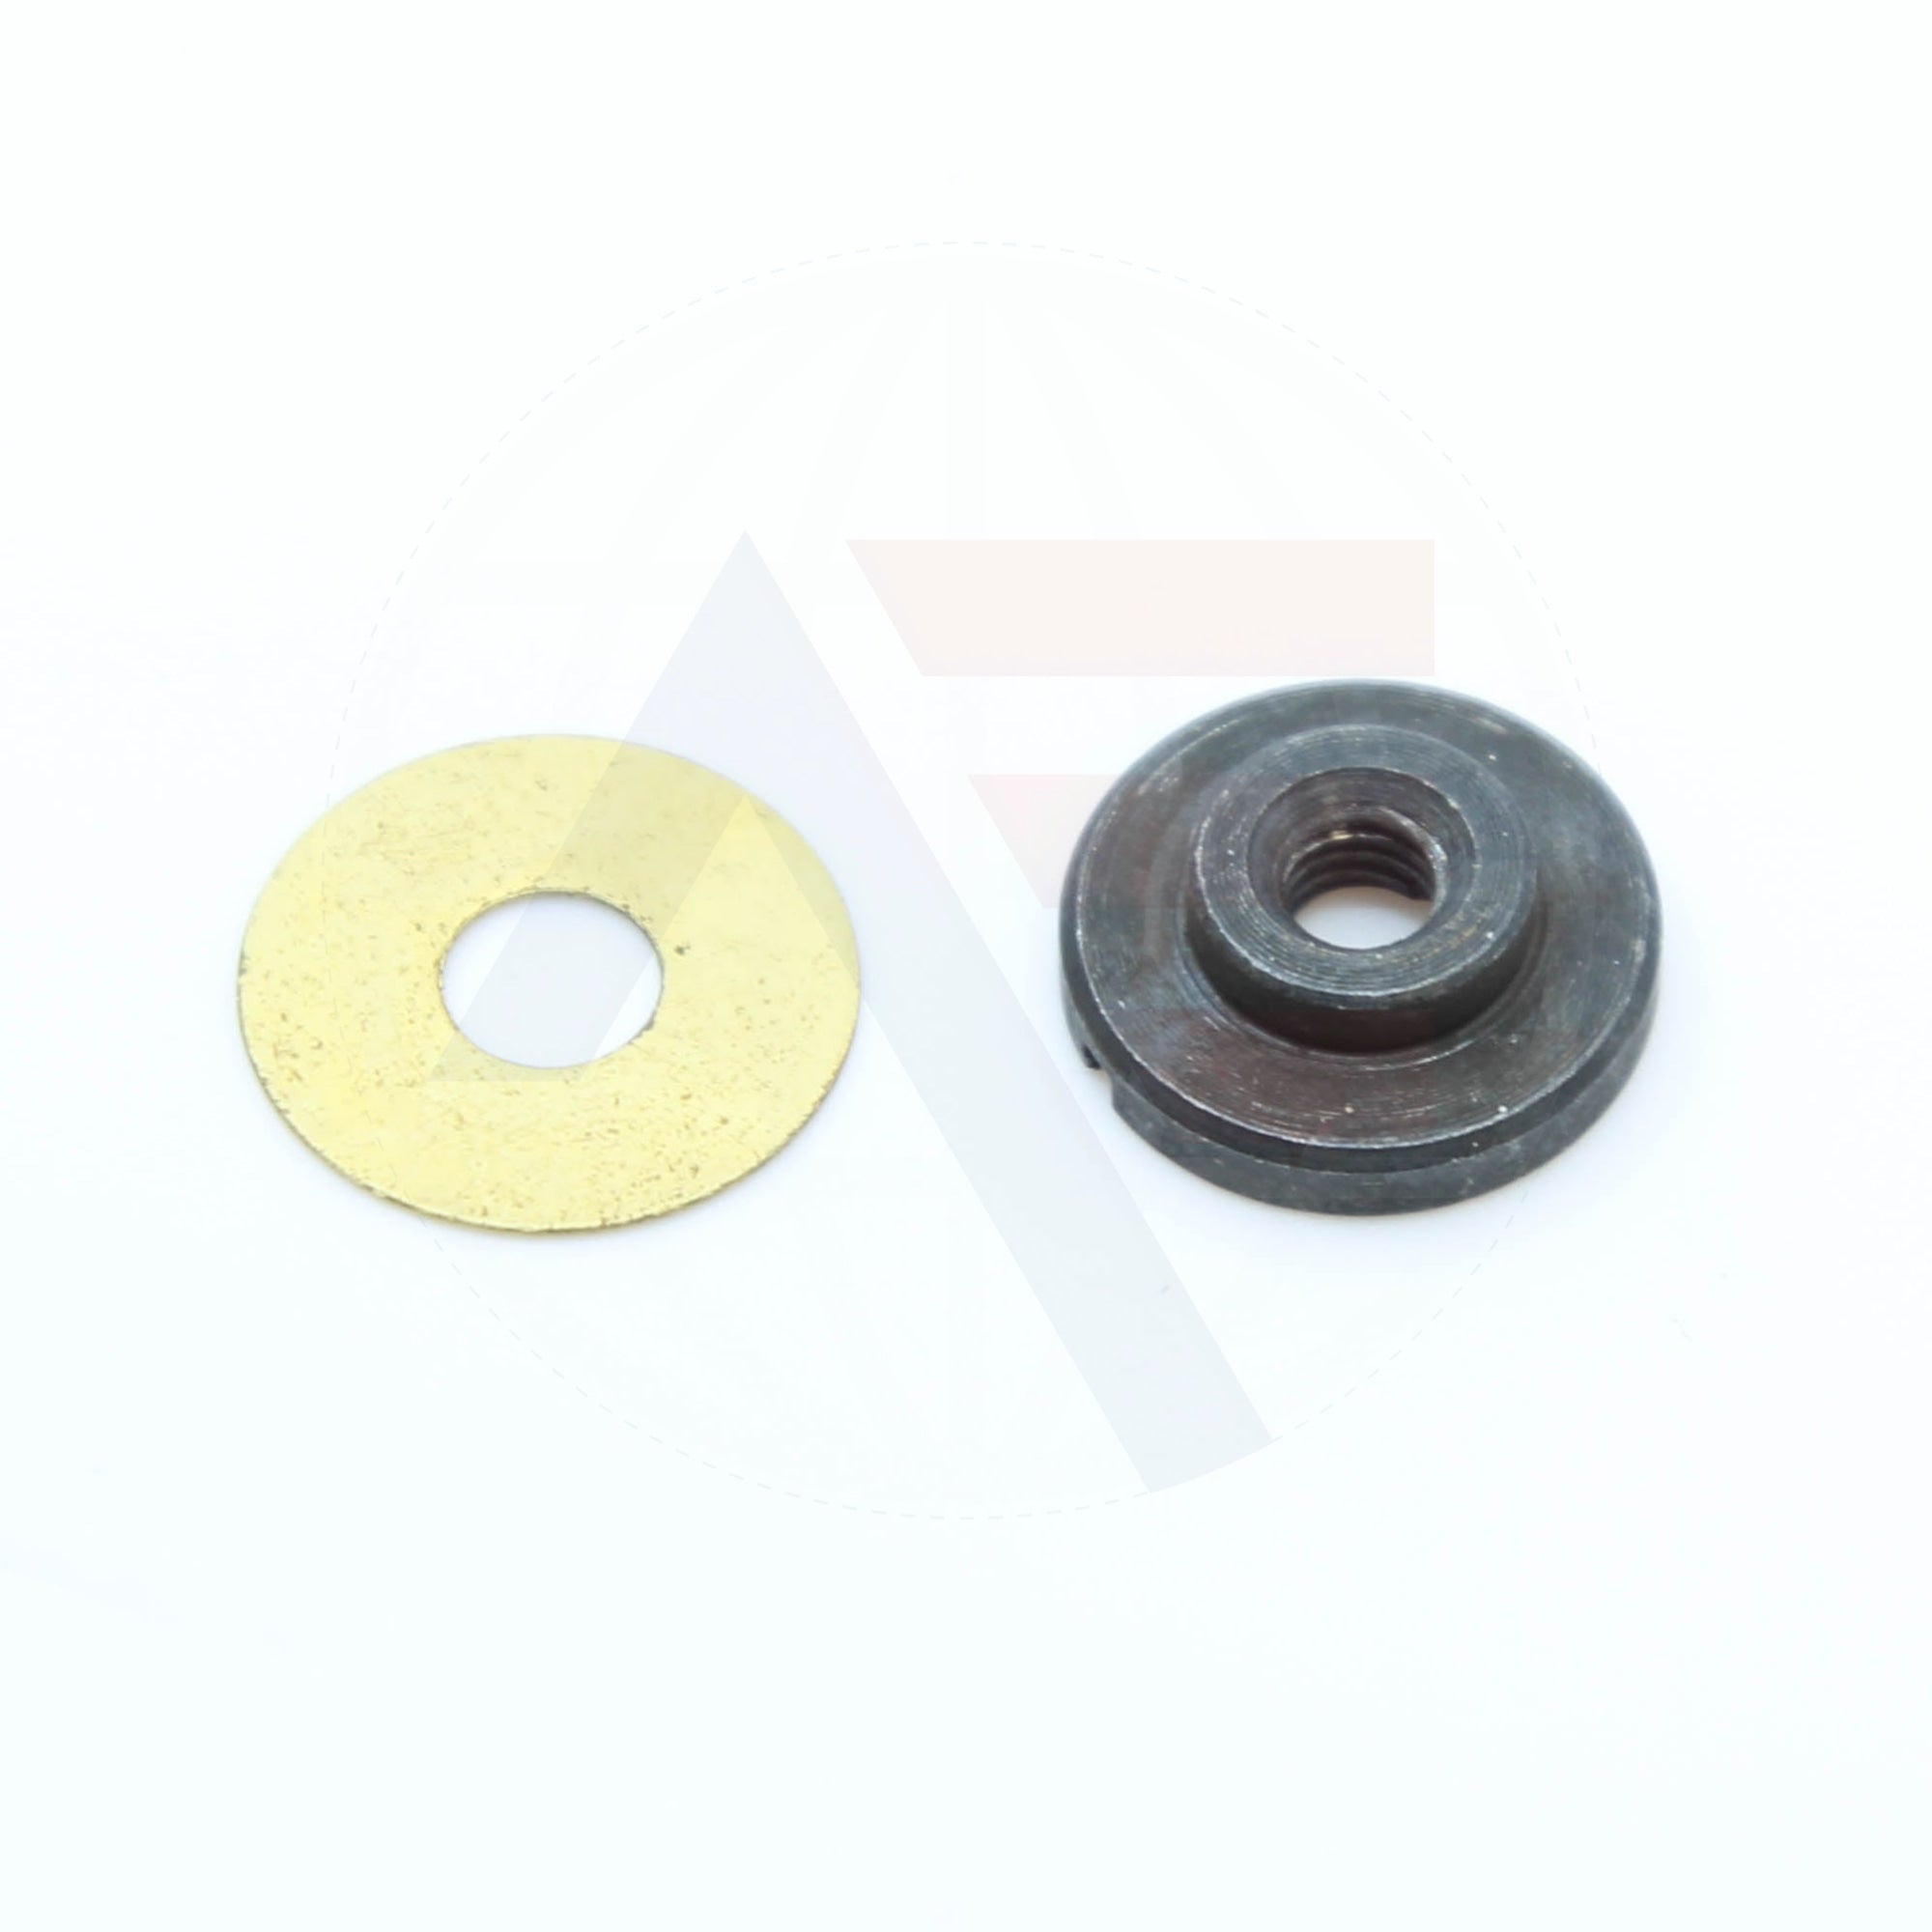 Dayang Rsd-100 S177 Washer For Lower Blade